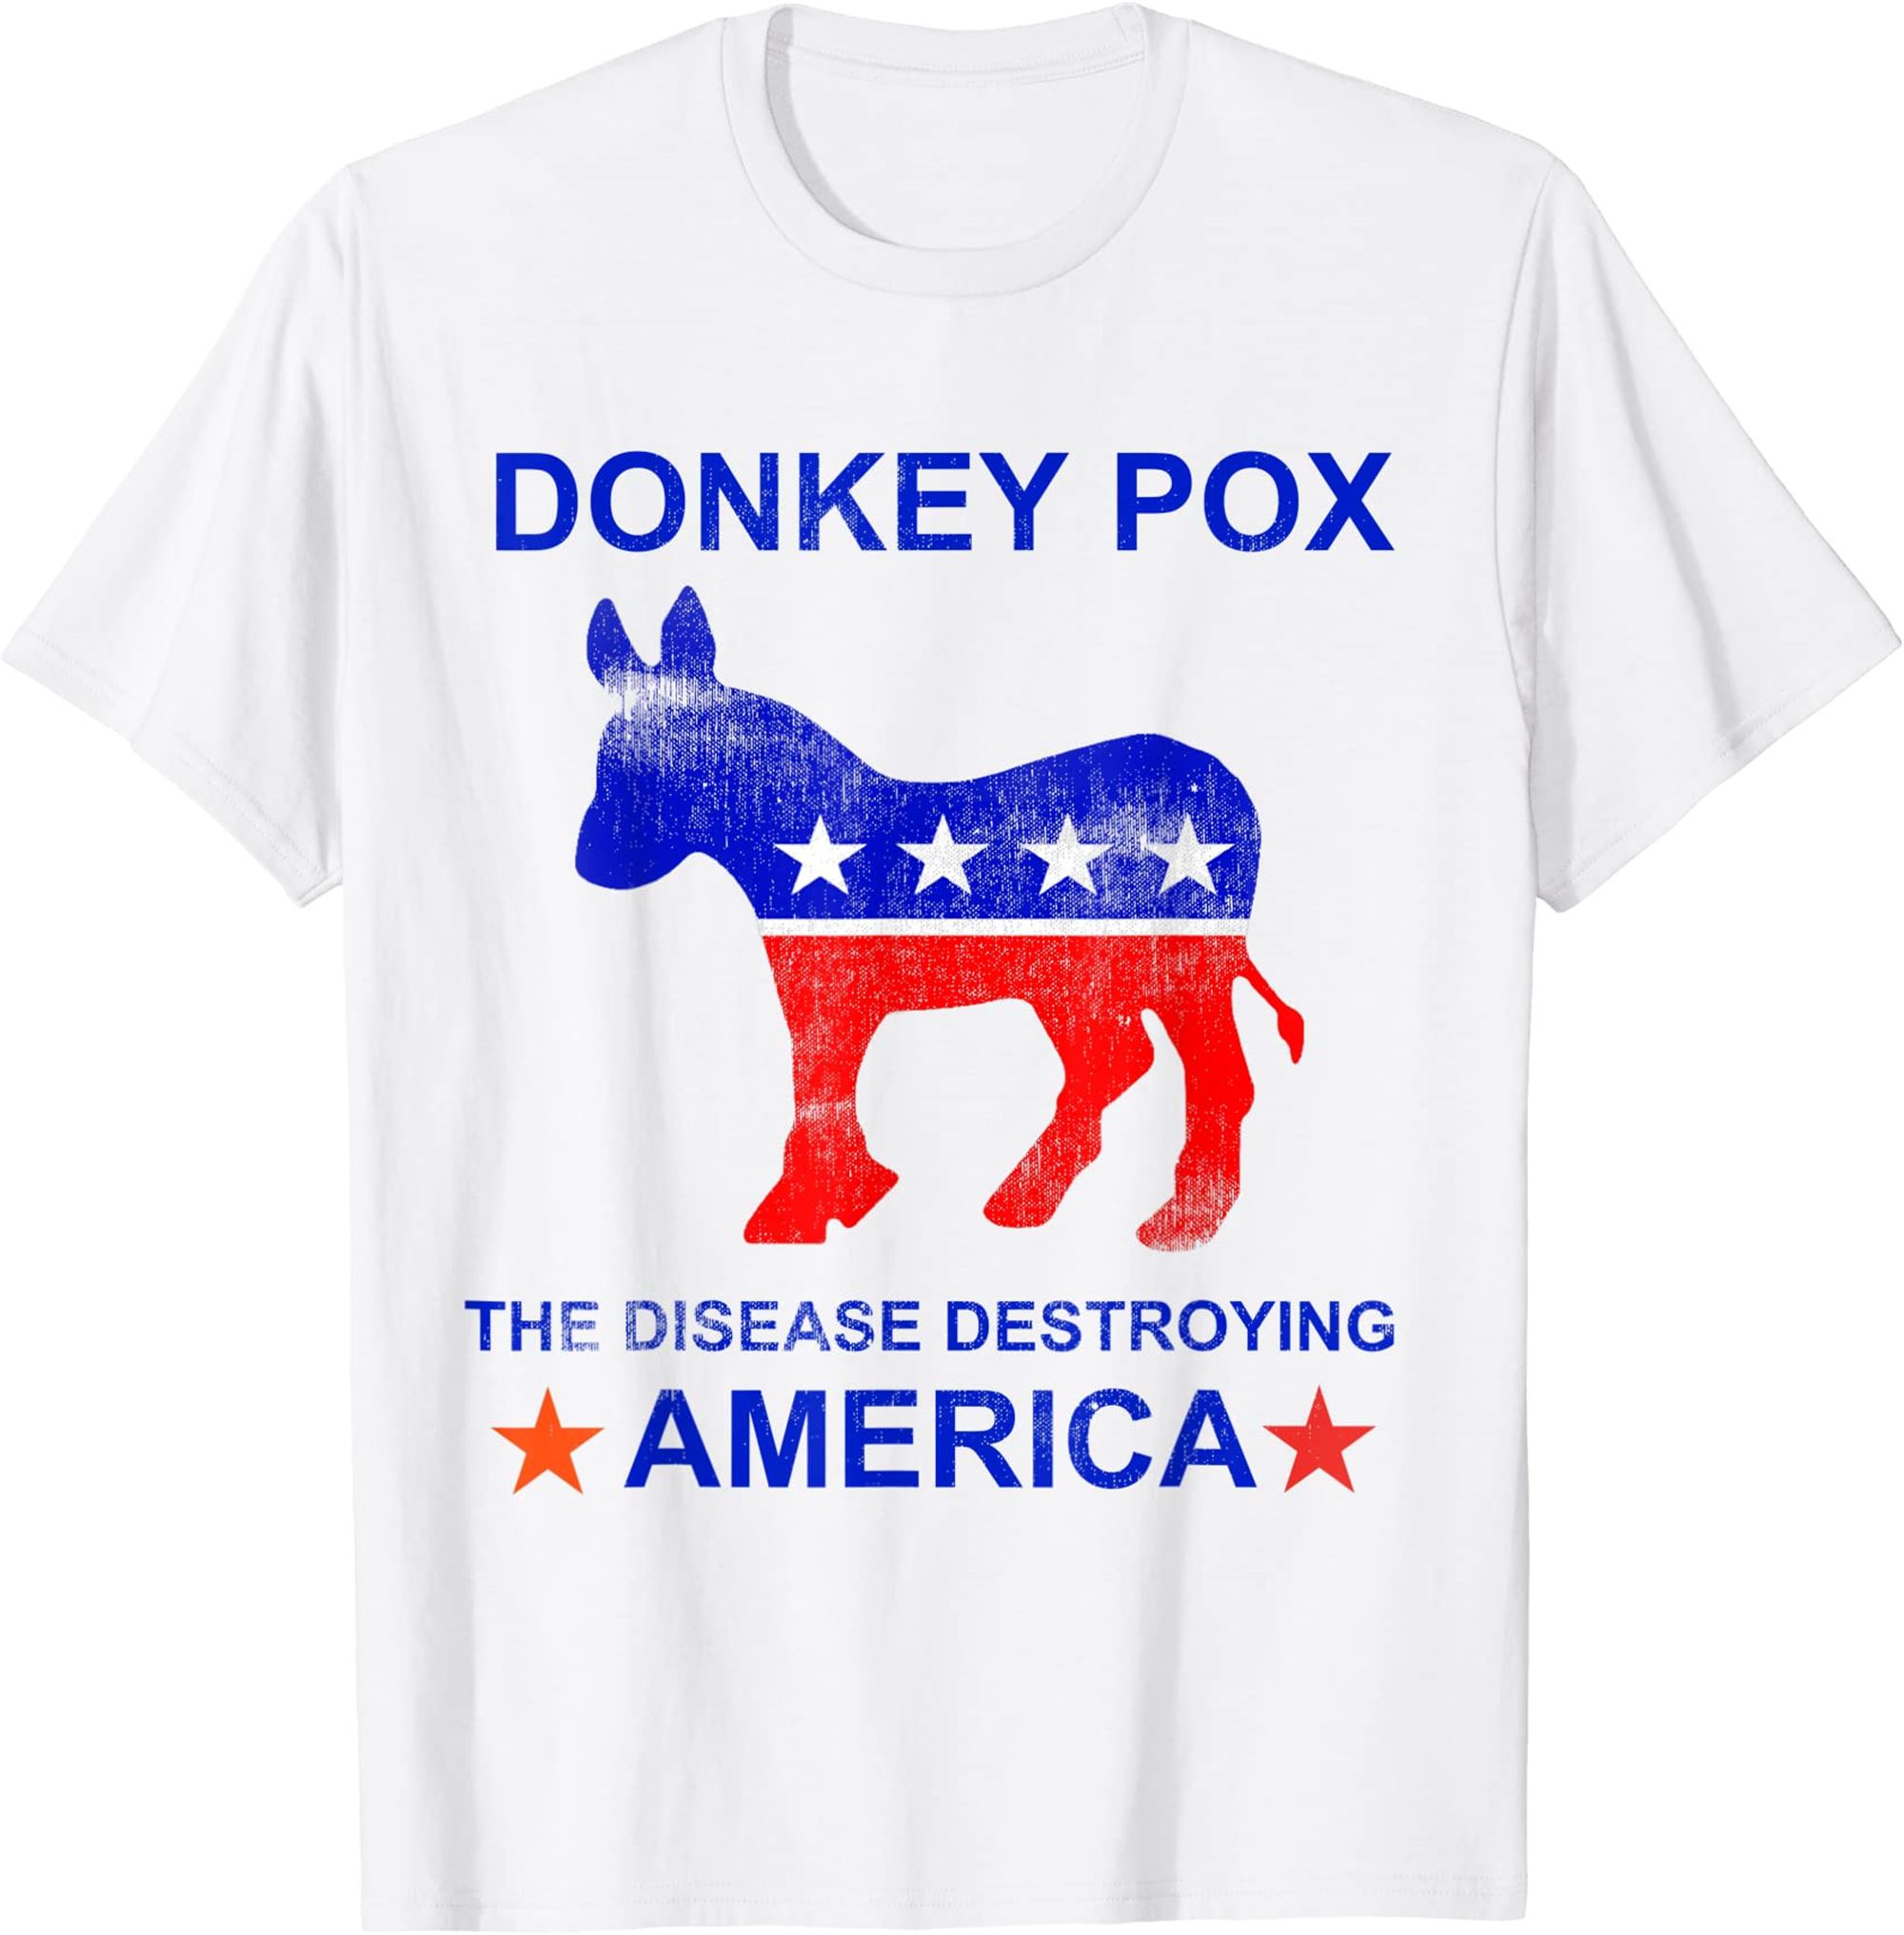 Donkey Pox The Disease Destroying America T-shirt Full Size Up To 5xl